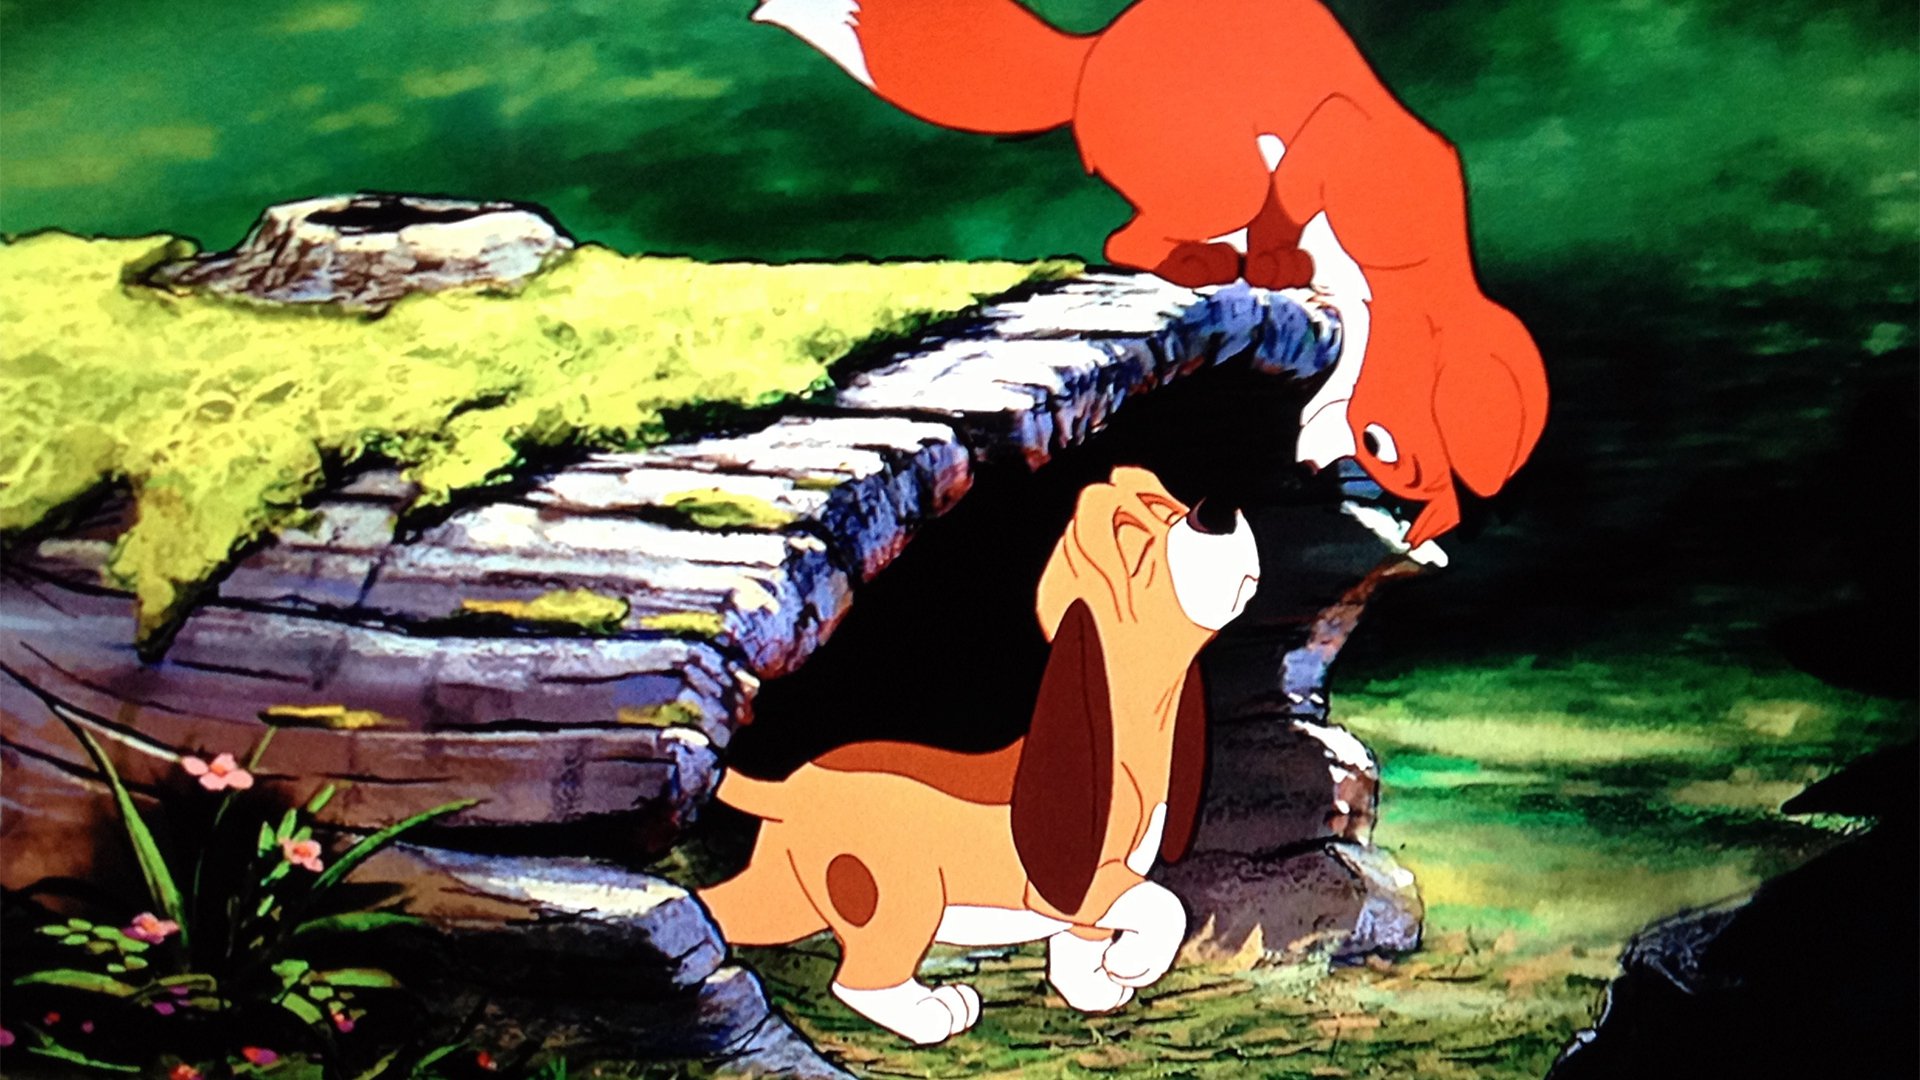 The Fox and the Hound backdrop